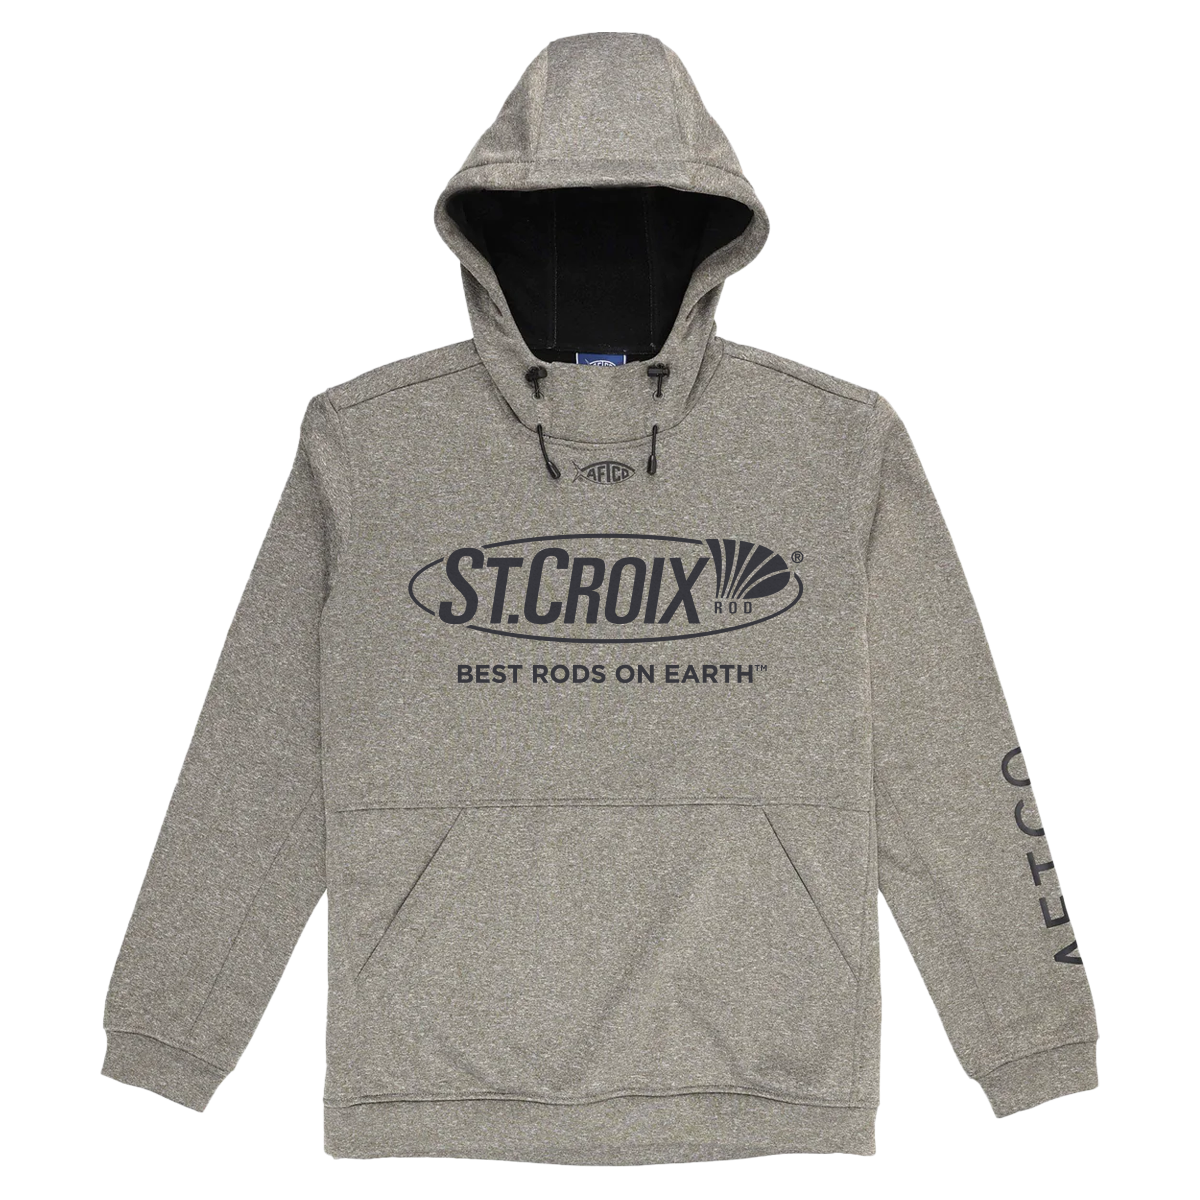 St. Croix AFTCO Shadow Hoodie XL / Charcoal Heather